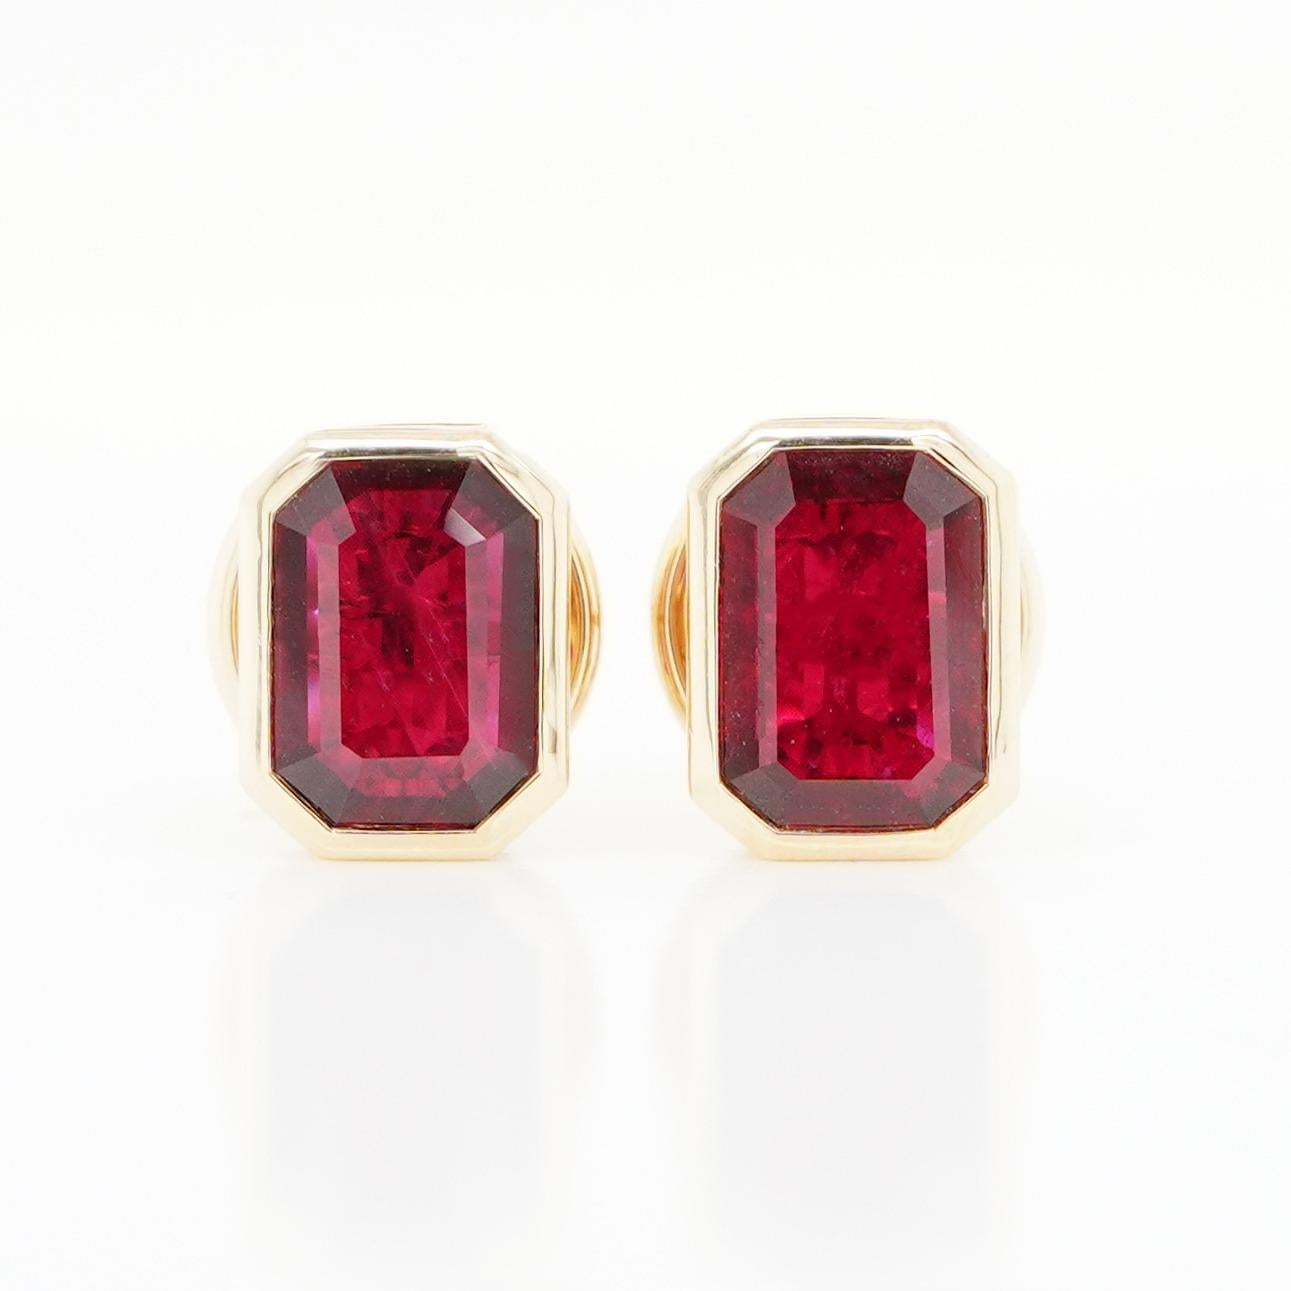 Octagon Cut 18K Yellow Gold And Ruby Earrings 3.18 ct. For Sale